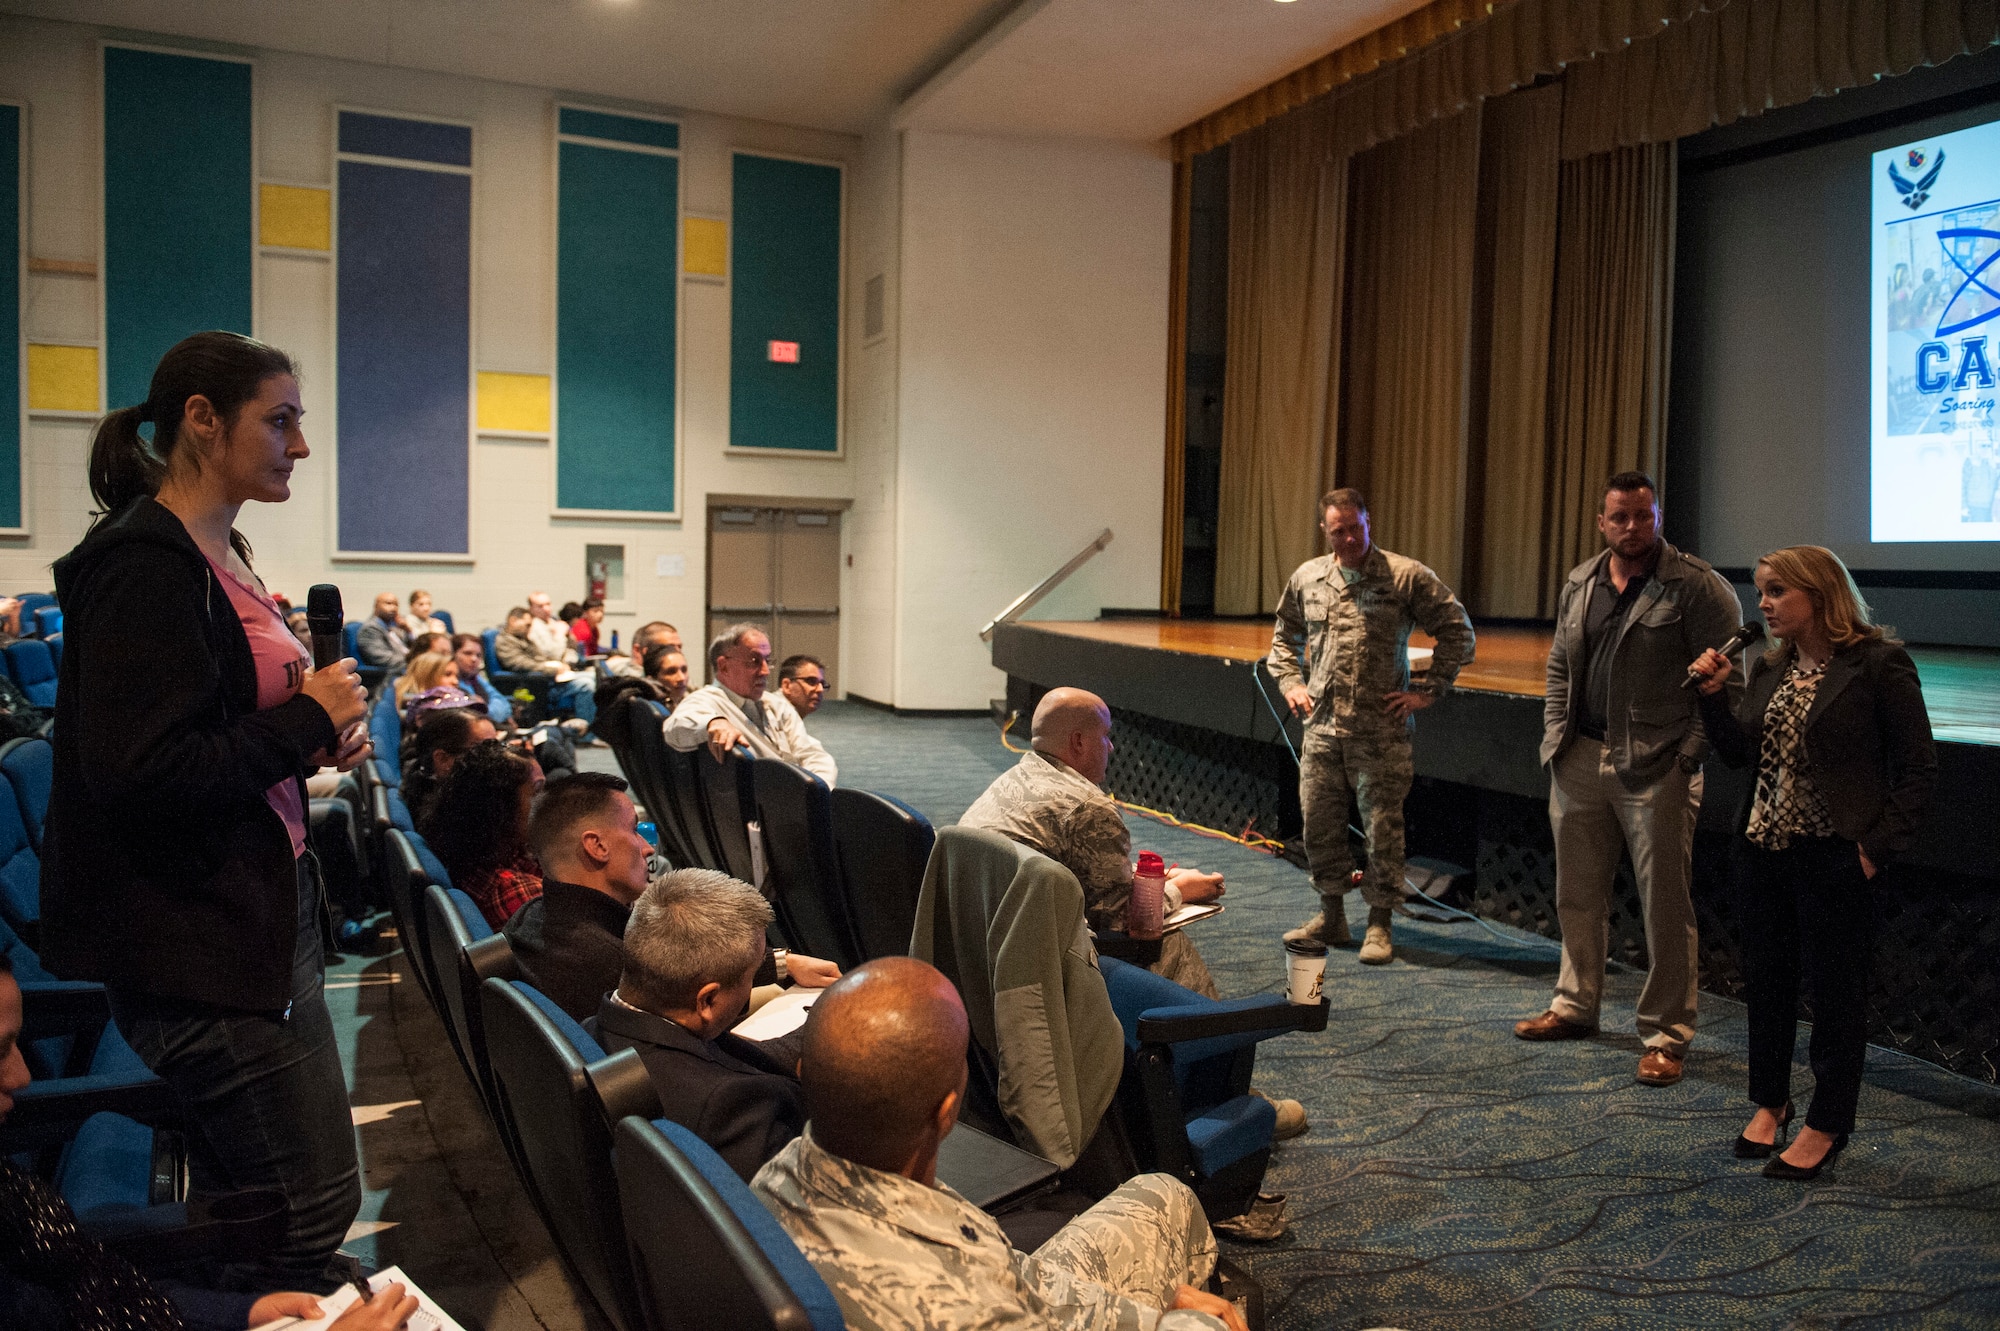 A representative from Coral Academy of Science Las Vegas answers a question from a participant in the public charter school town hall meeting at Nellis Air Force Base, Nev., Dec. 15, 2015. Boutwell and the CASLV reps provided approximately 200 audience members information and answers to pressing questions. (U.S Air Force photo by Staff Sgt. Siuta B. Ika)